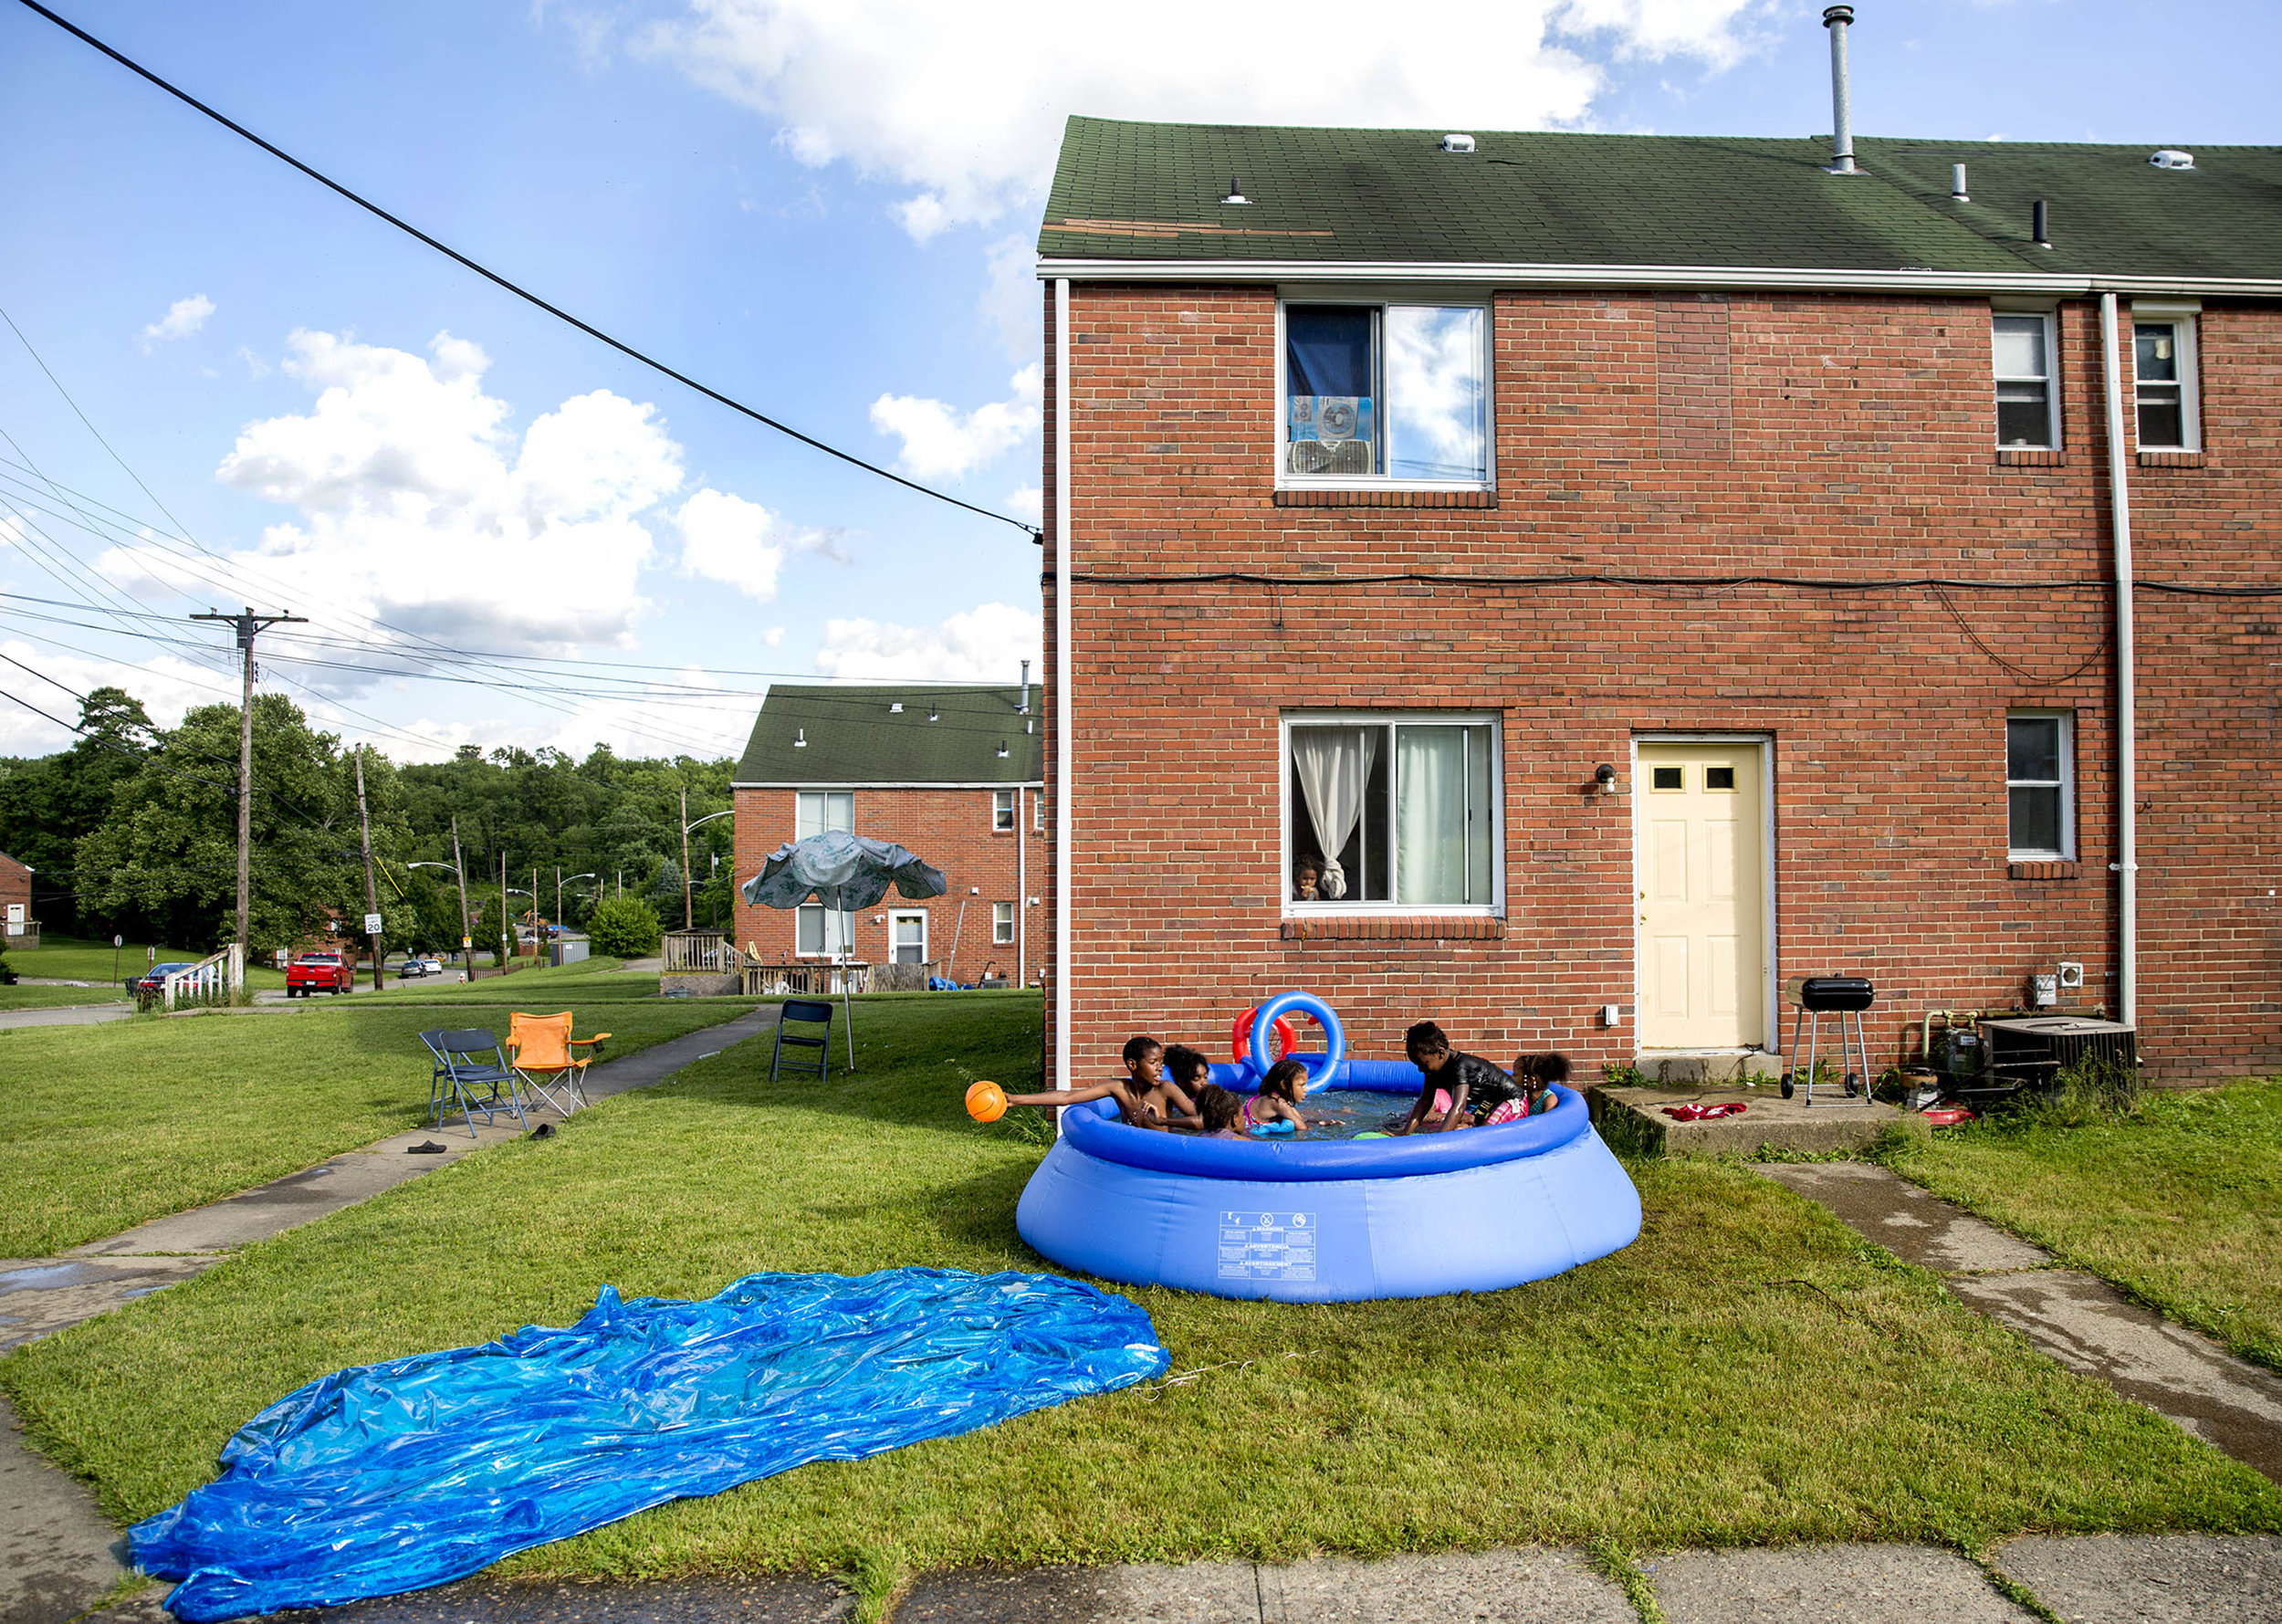  Jemarcus Compton, 12, of Clairton, stretches his arm out to keep posession of the ball while playing with friends in an inflatable pool on Monday, June 4, 2018 at the Century Townhomes in Clairton. Several hundred residents of the Century Townhomes 